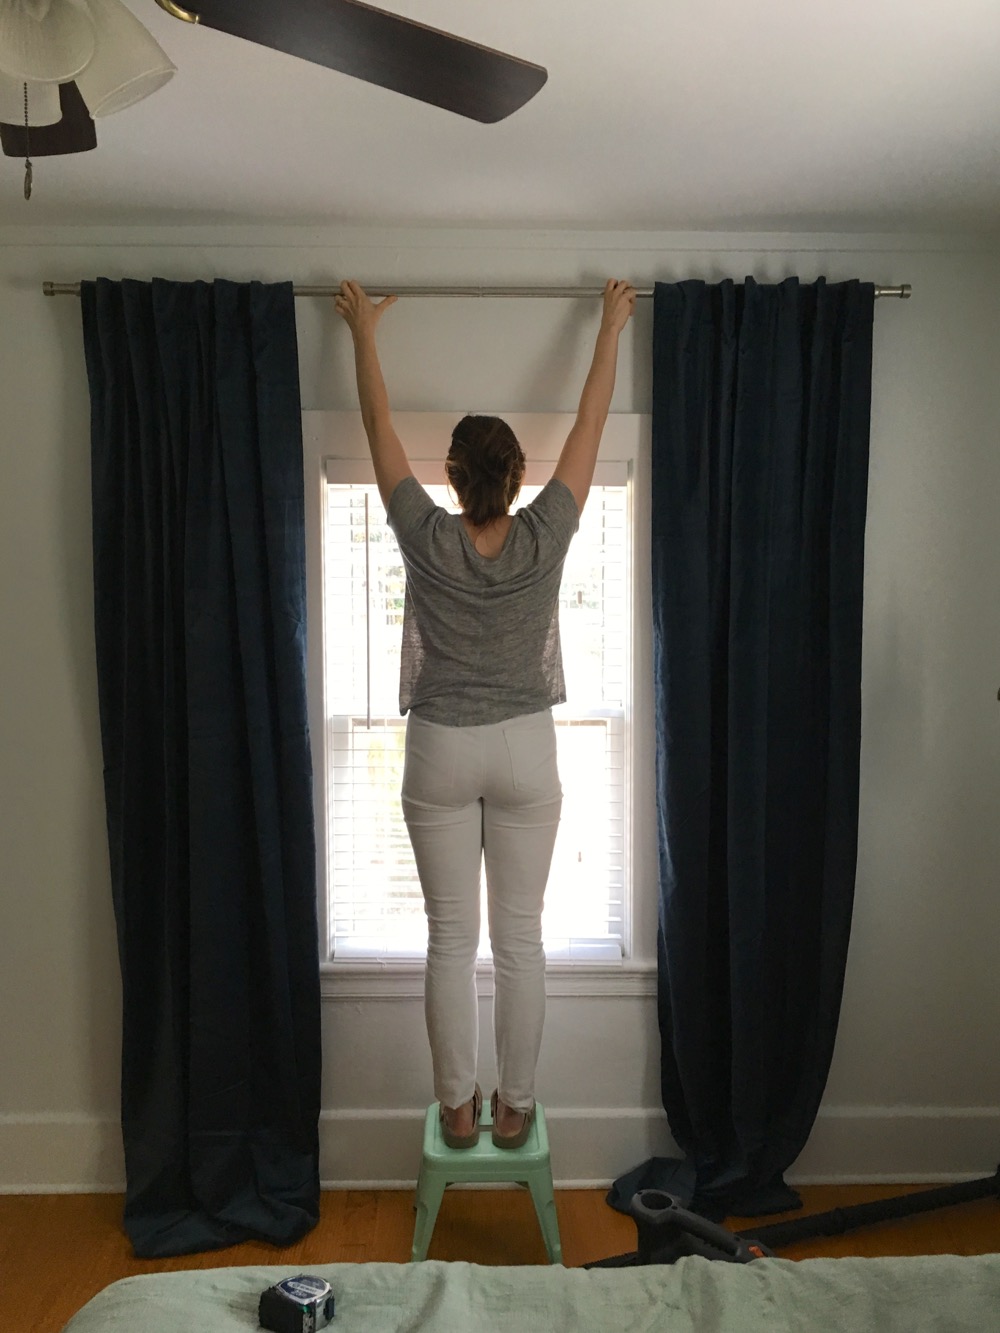 Hanging On Plaster Walls A How To For, How To Hang Very Heavy Curtains